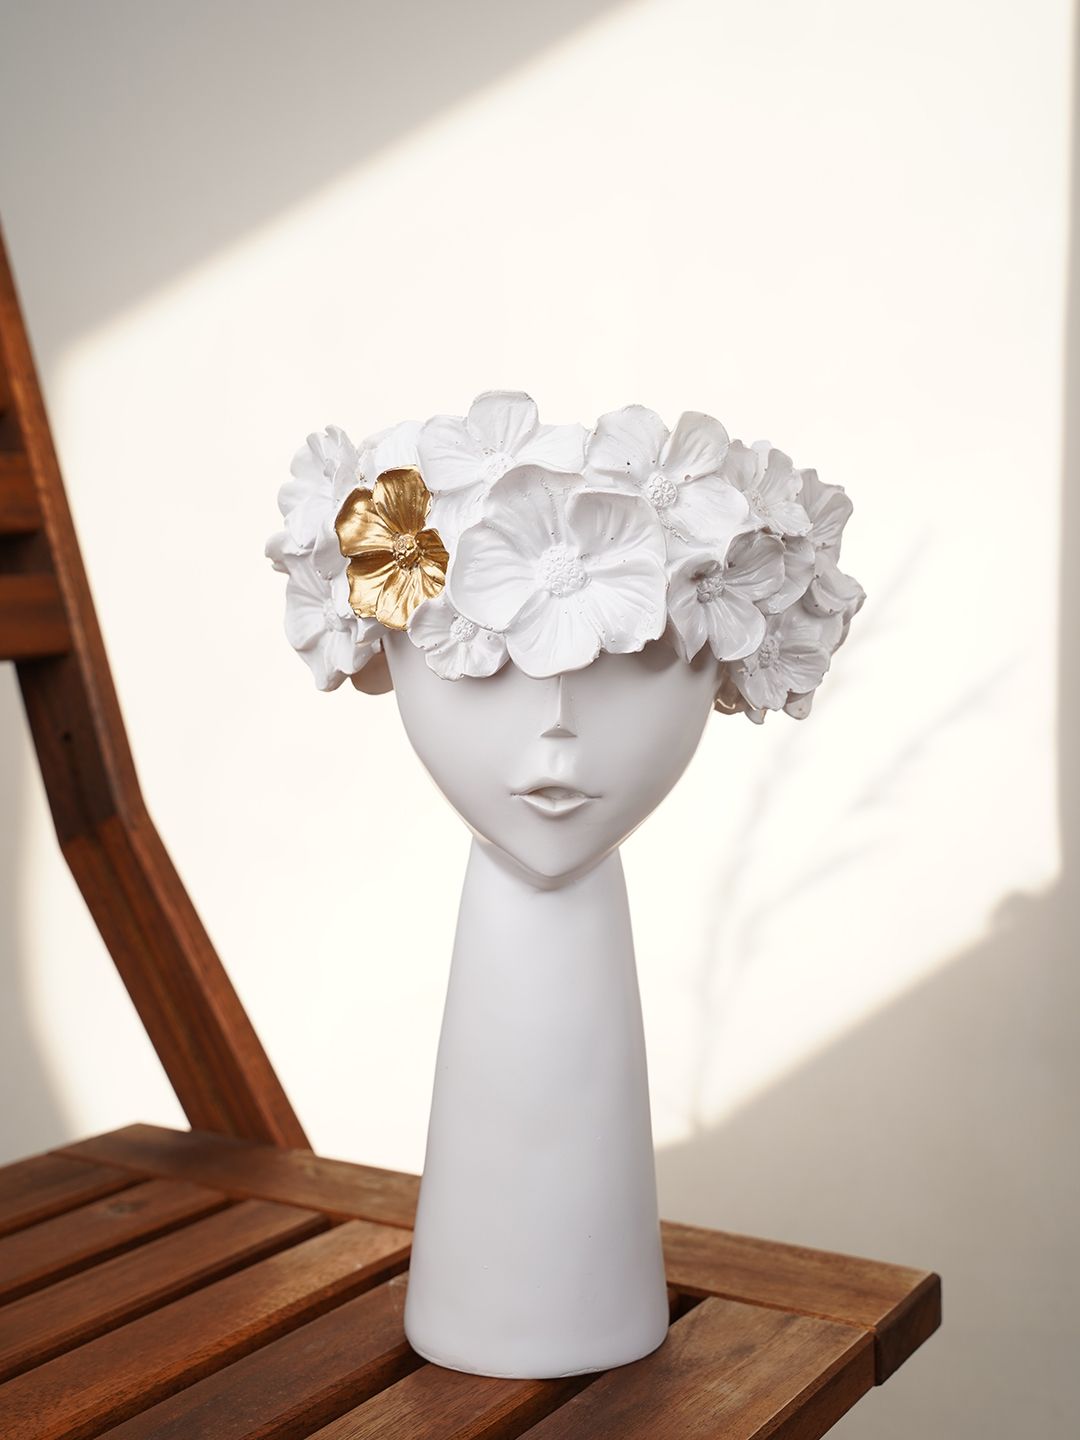 Folkstorys White & Gold-Toned Women Head Resin Vase Price in India